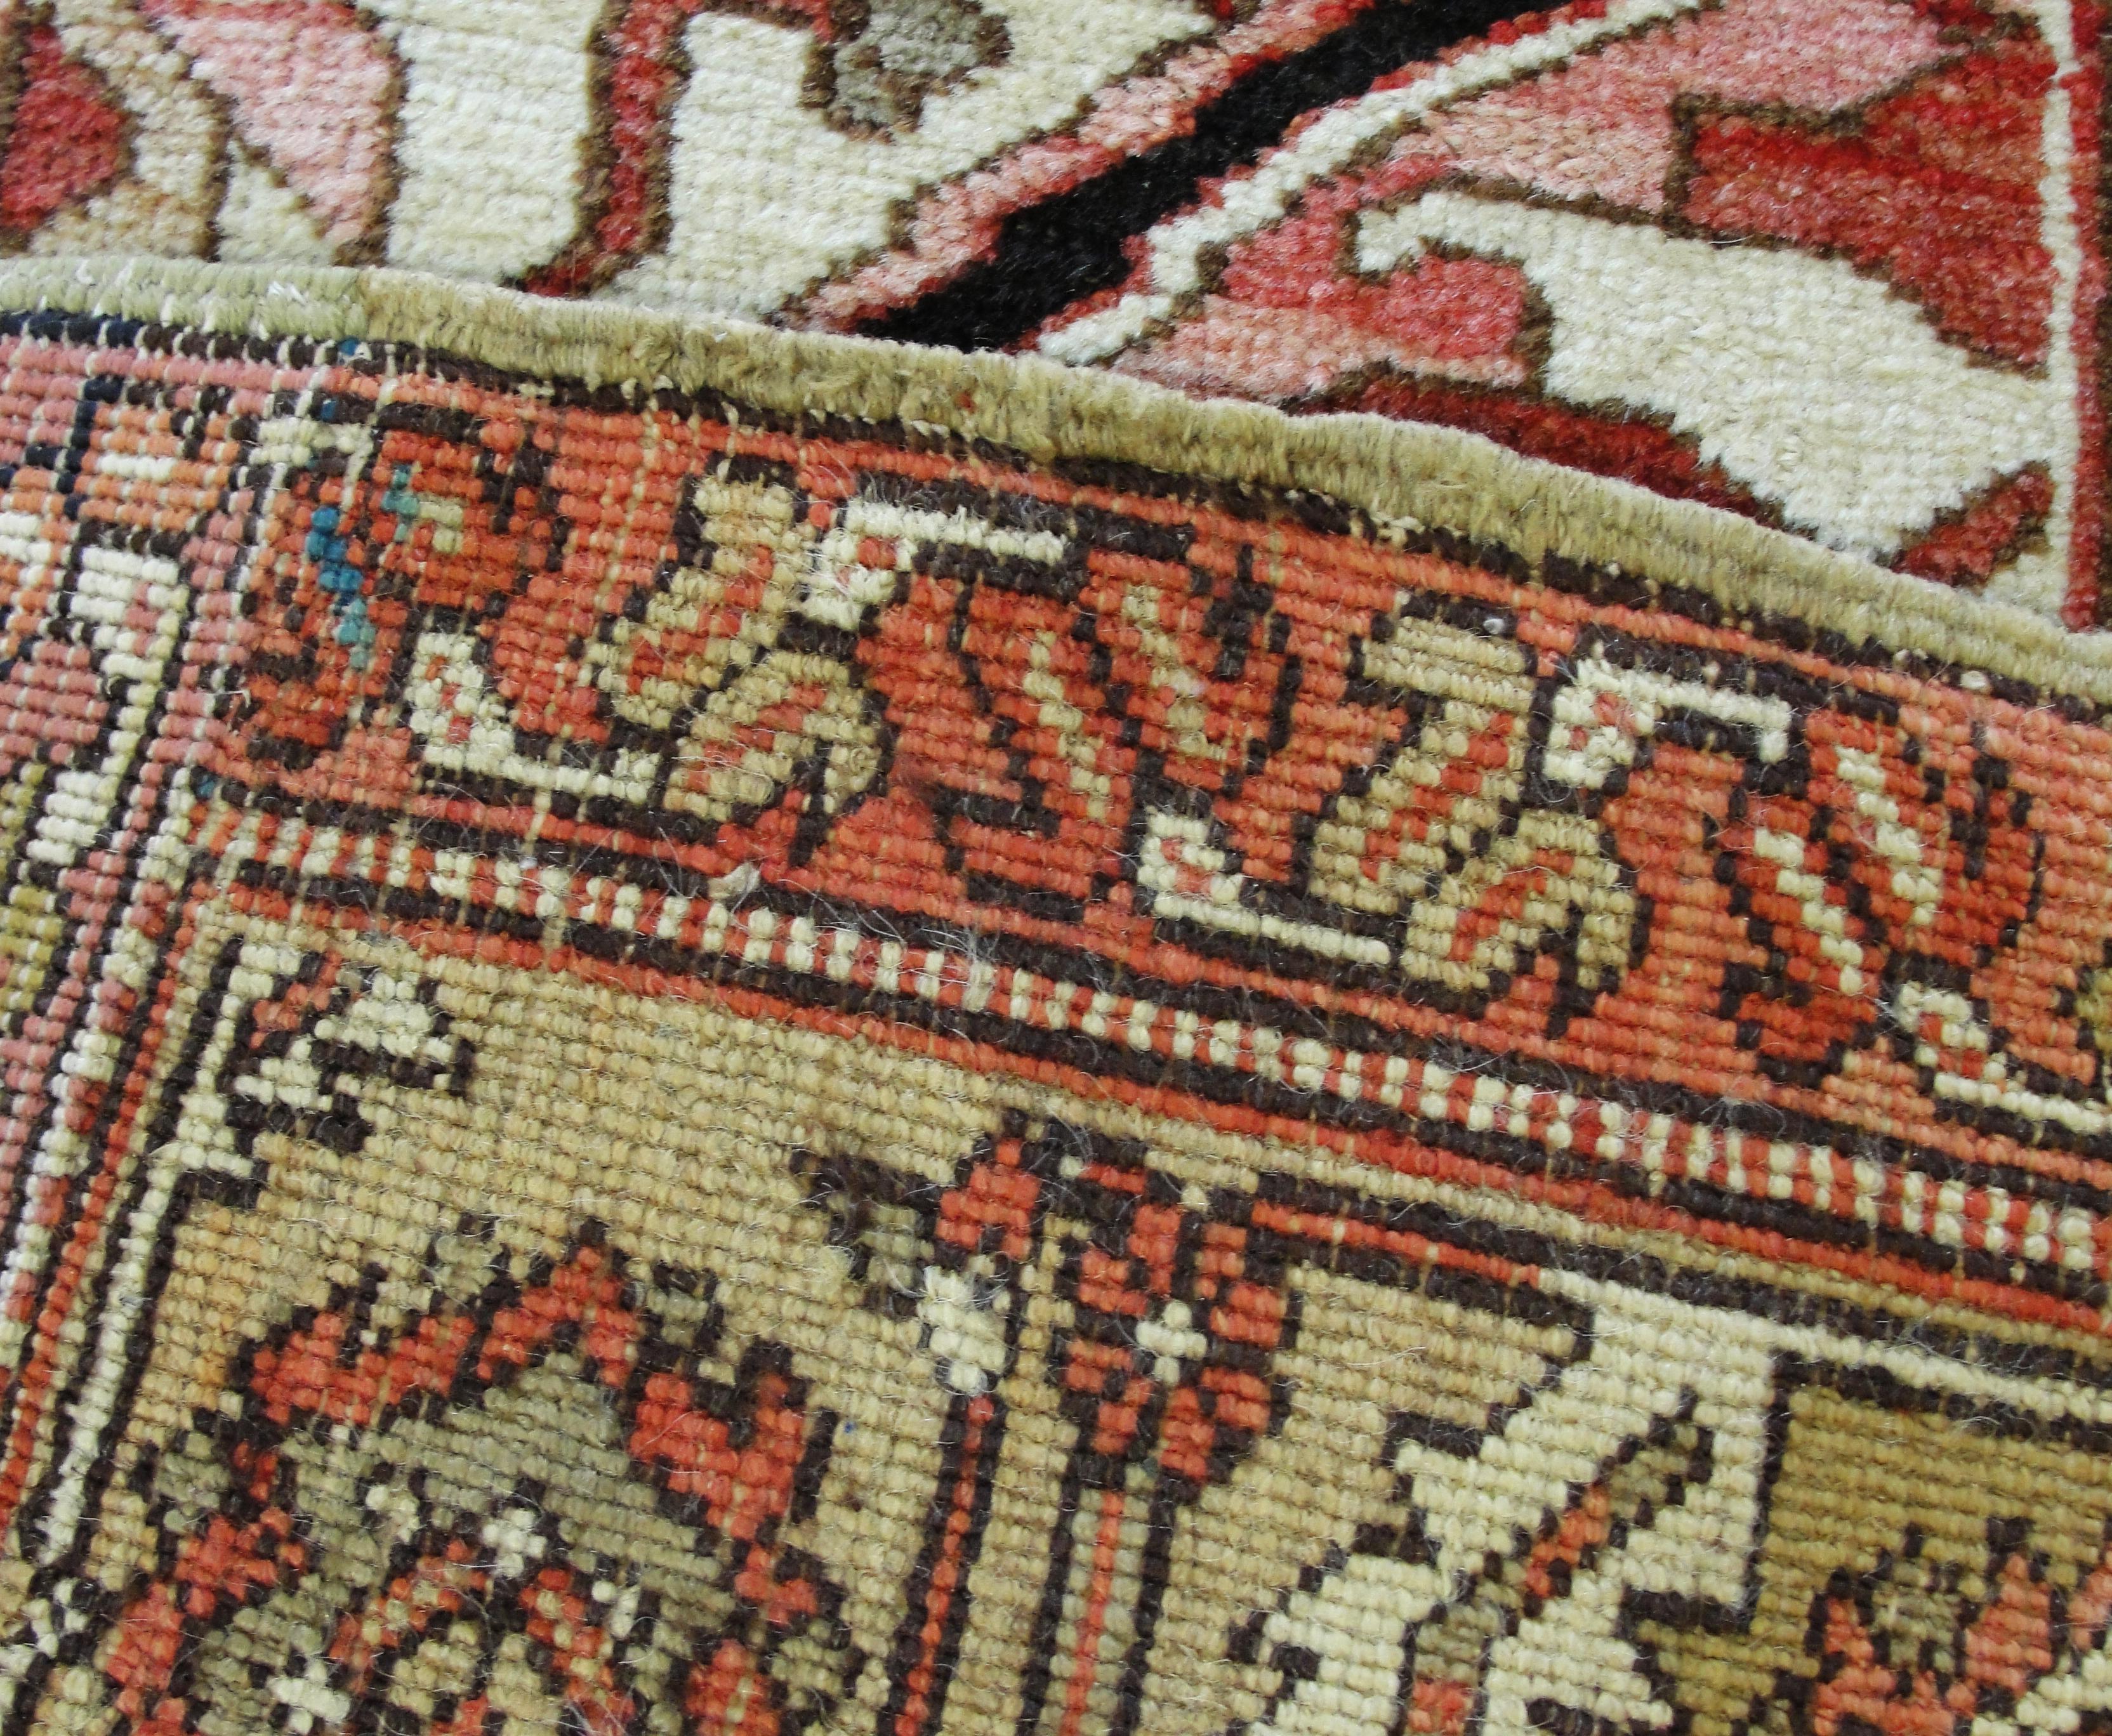 Amazing soft colors, nice and not busy, good quality and condition, circa 1880.
Woven in the rugged mountains of Northwest Persia, Serapi rugs are a distinct Heriz region style, with finer knotting and more large-scale spaciously placed antique